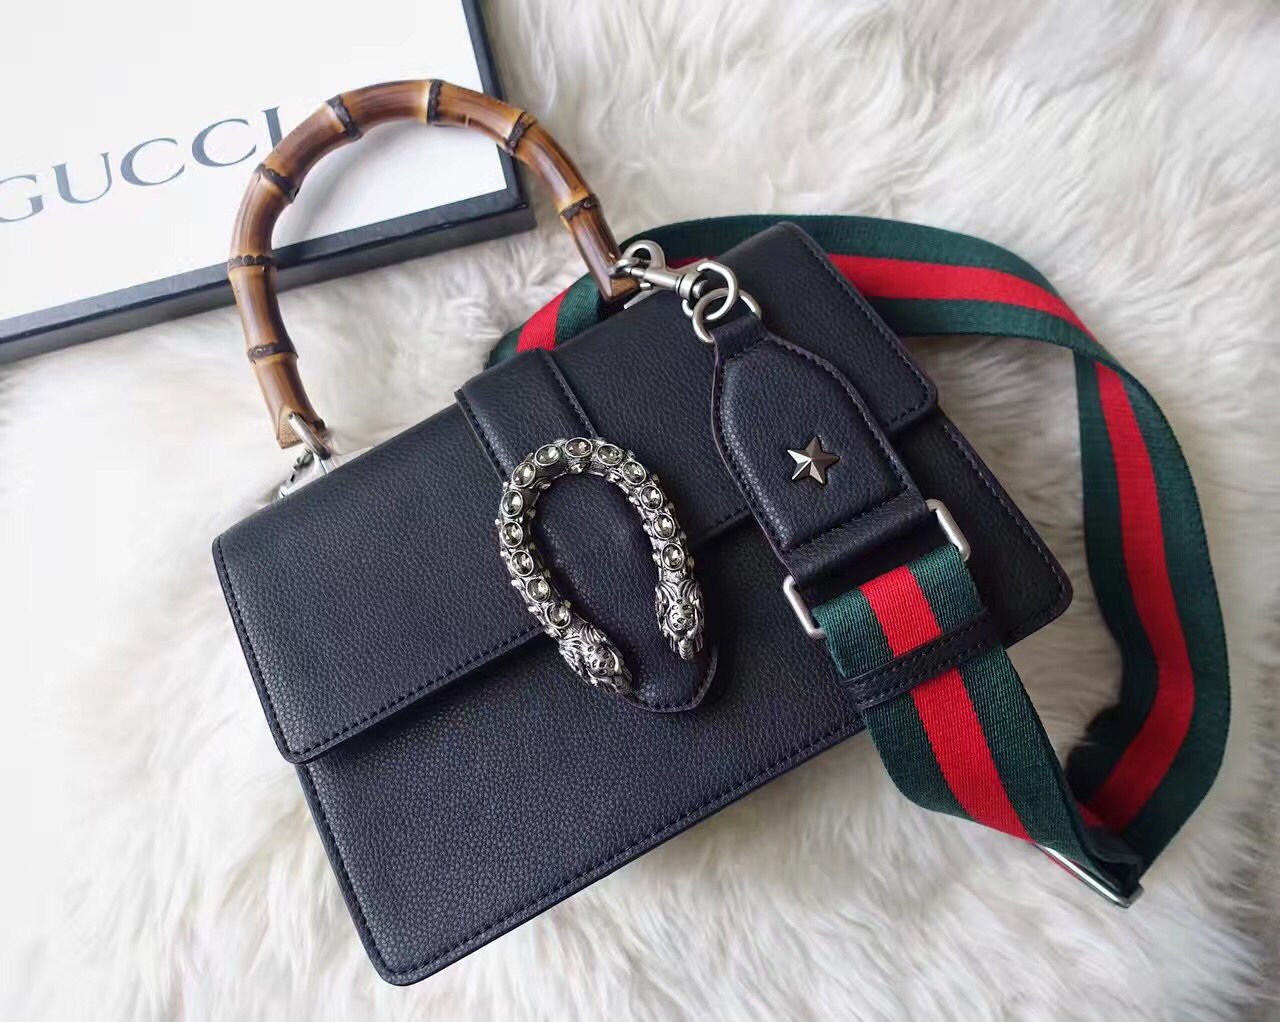 Gucci Dionysus Bamboo Top Handle Leather Bag In Black